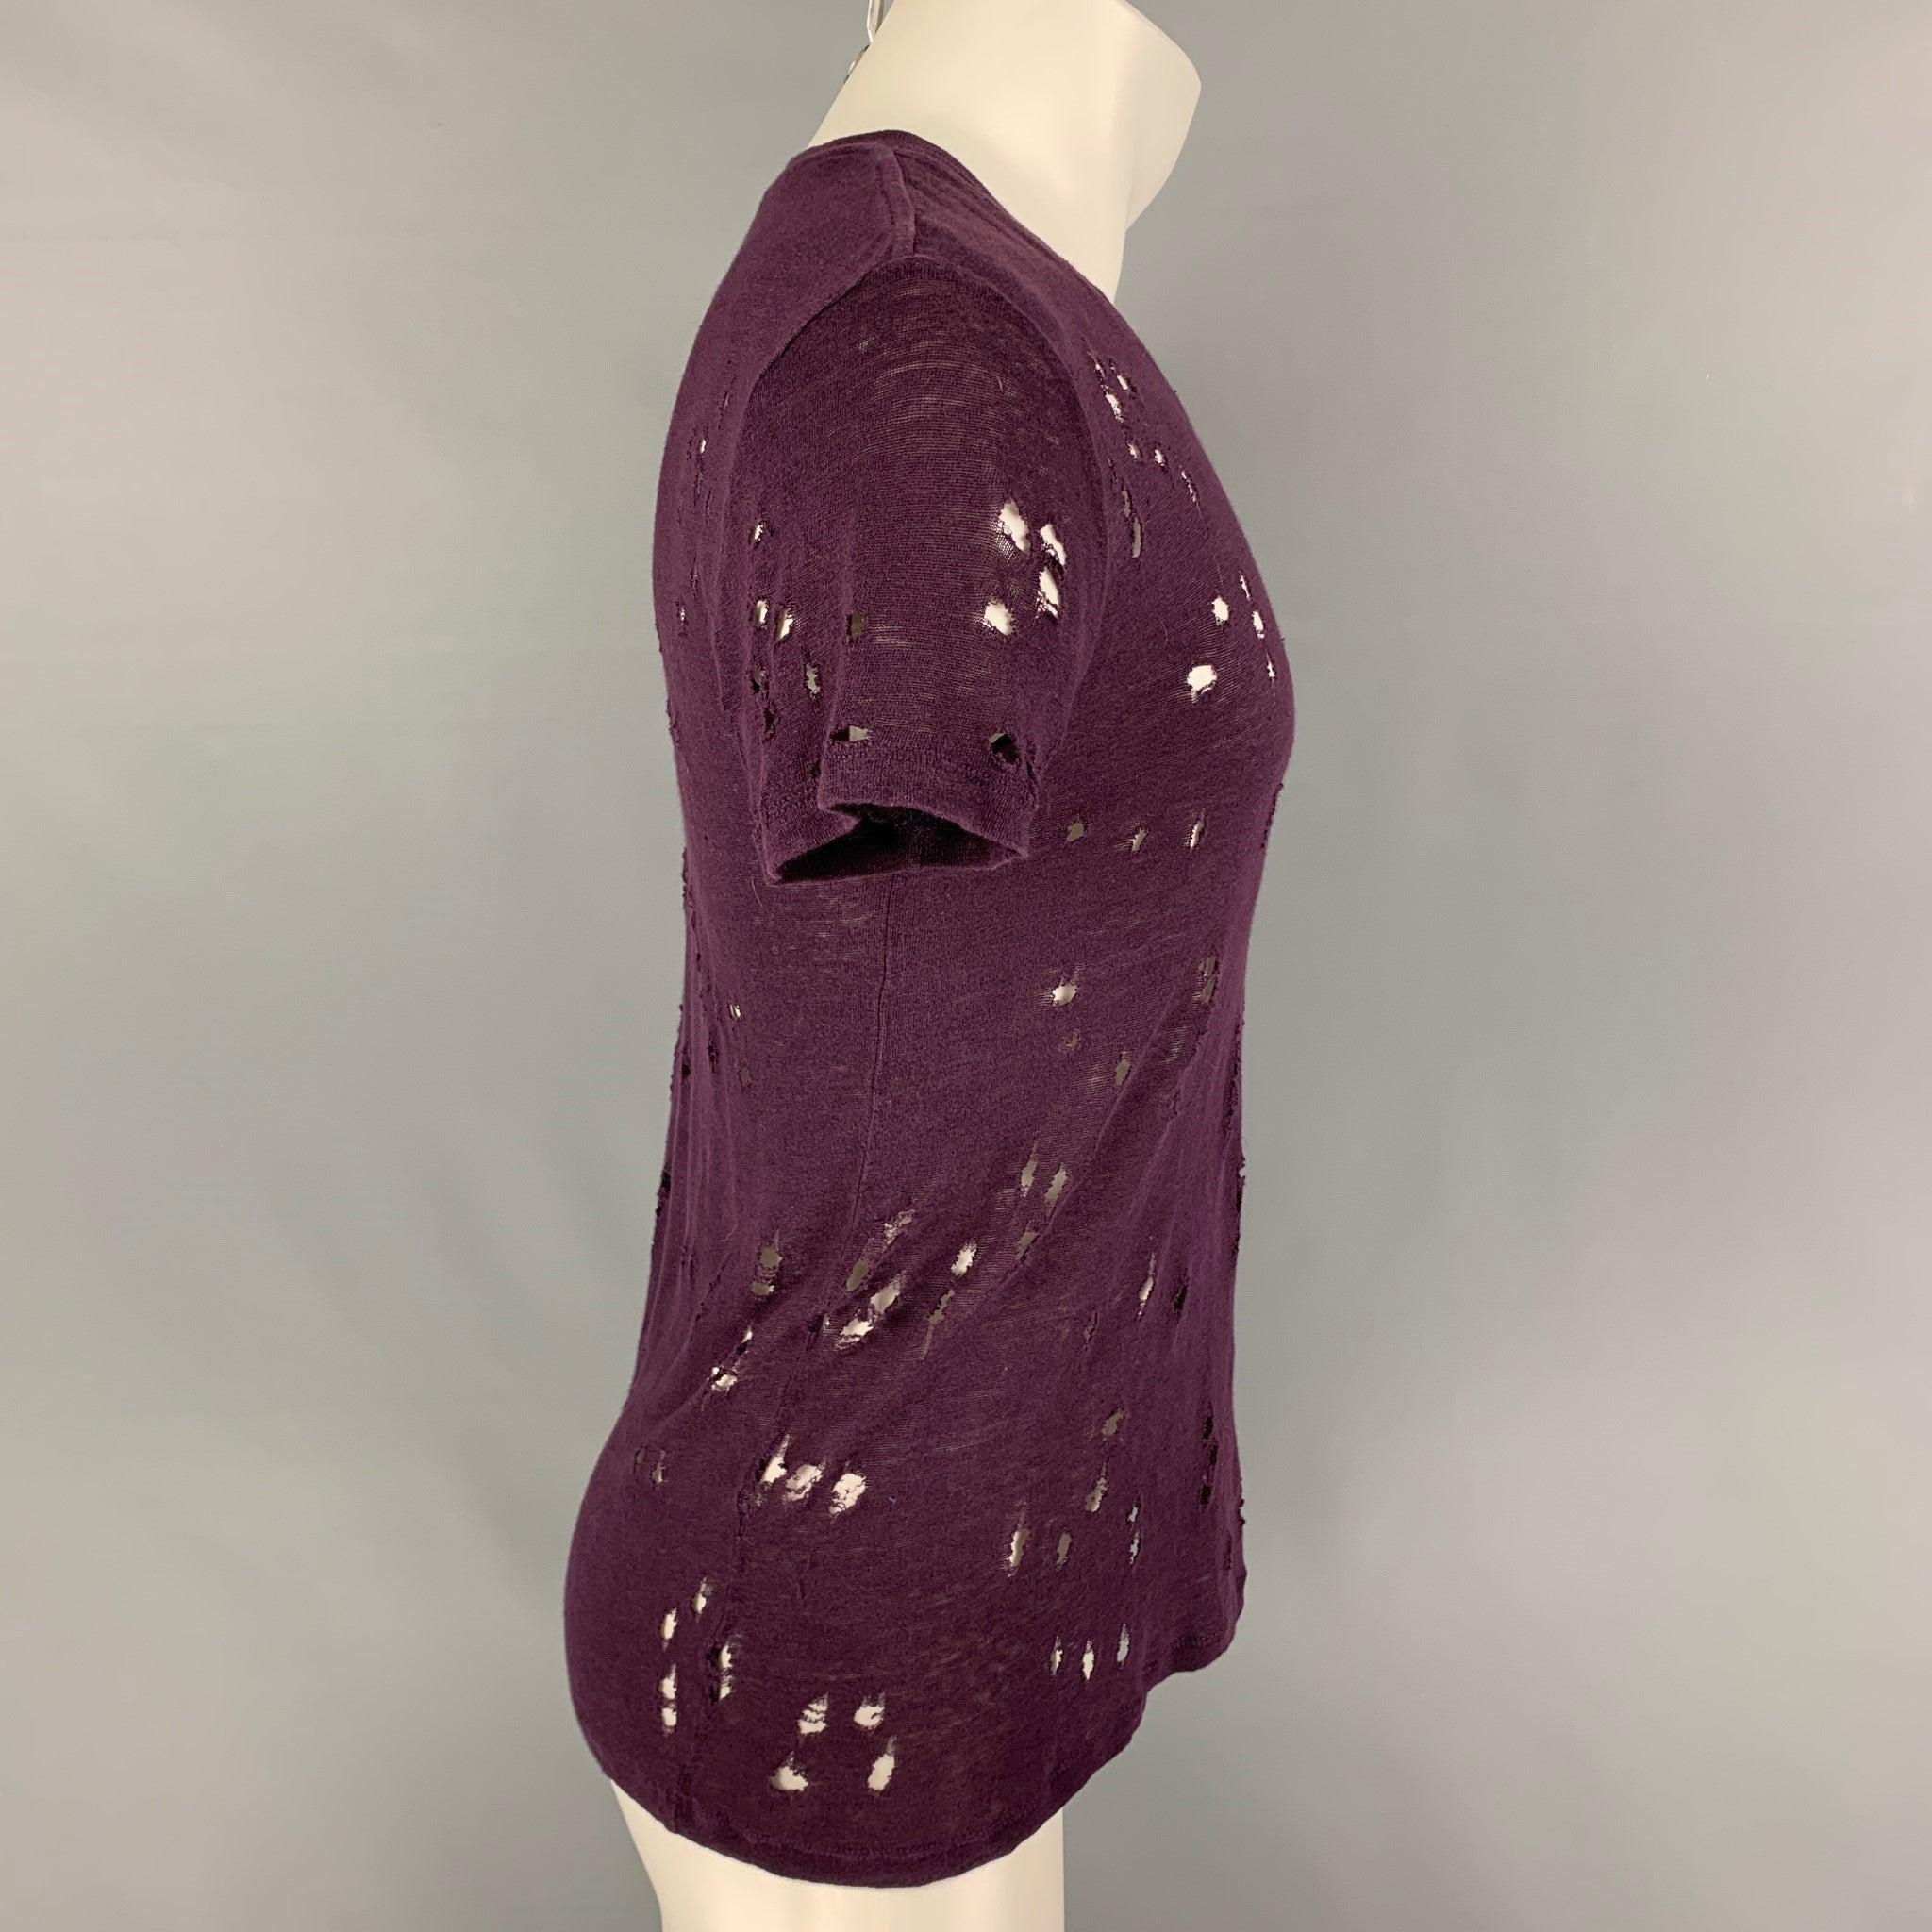 IRO 'Clay' t-shirt comes in a purple linen featuring distressed details throughout and a crew-neck. Made in Portugal.
Very Good Pre-Owned Condition.  

Marked:   XS 

Measurements: 
 
Shoulder: 17 inches  Chest: 36 inches  Sleeve: 7.5 inches Length: